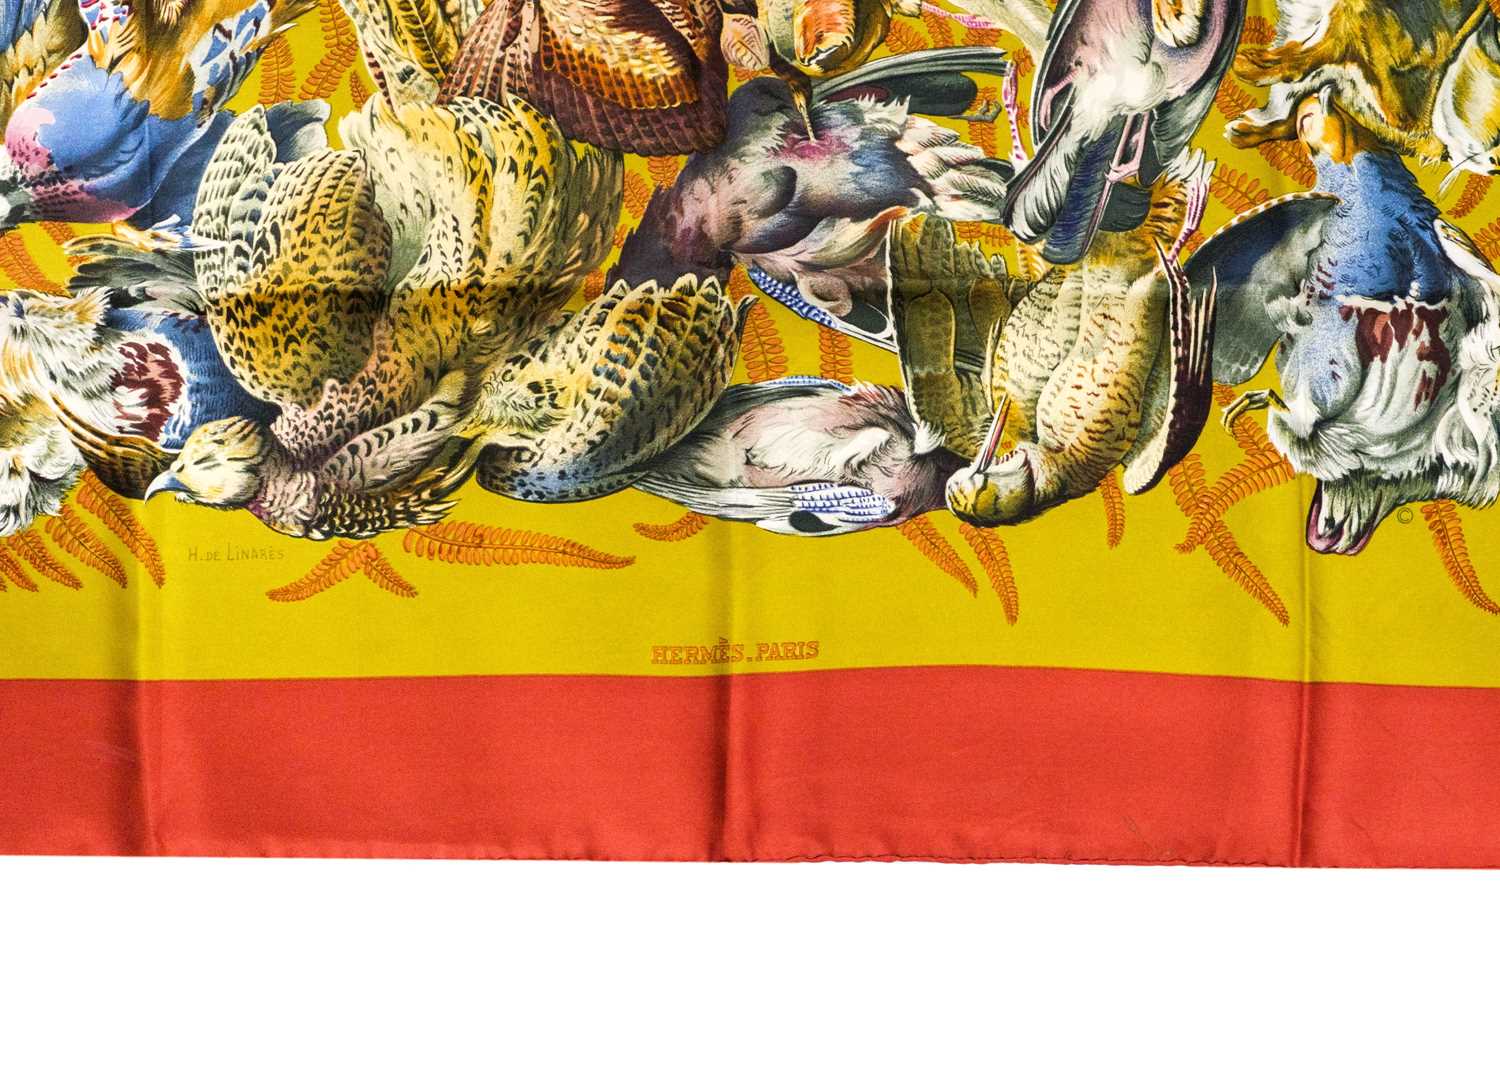 HERMES - A printed silk scarf in 'Gibiers' pattern. - Image 2 of 4